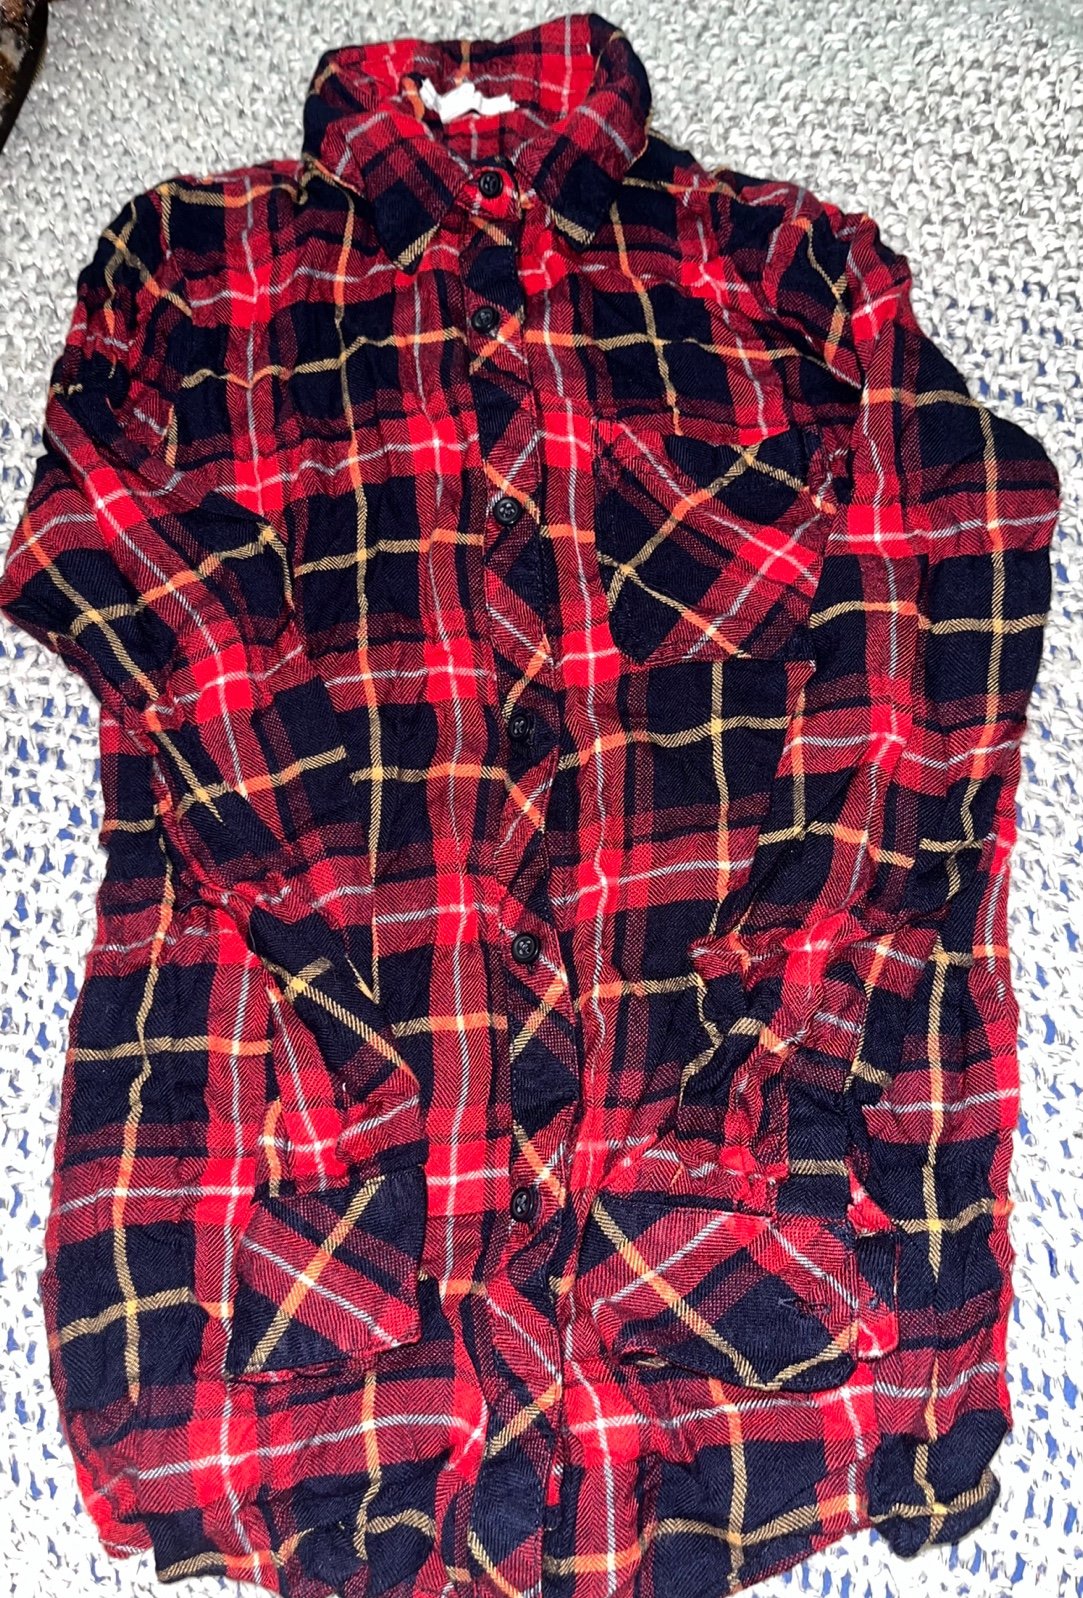 Wholesale price BEACH LUNCH LOUNGE Womens Shirt Red, yellow, navy blue Black Plaid Collared Size LucR4Rkad Cool